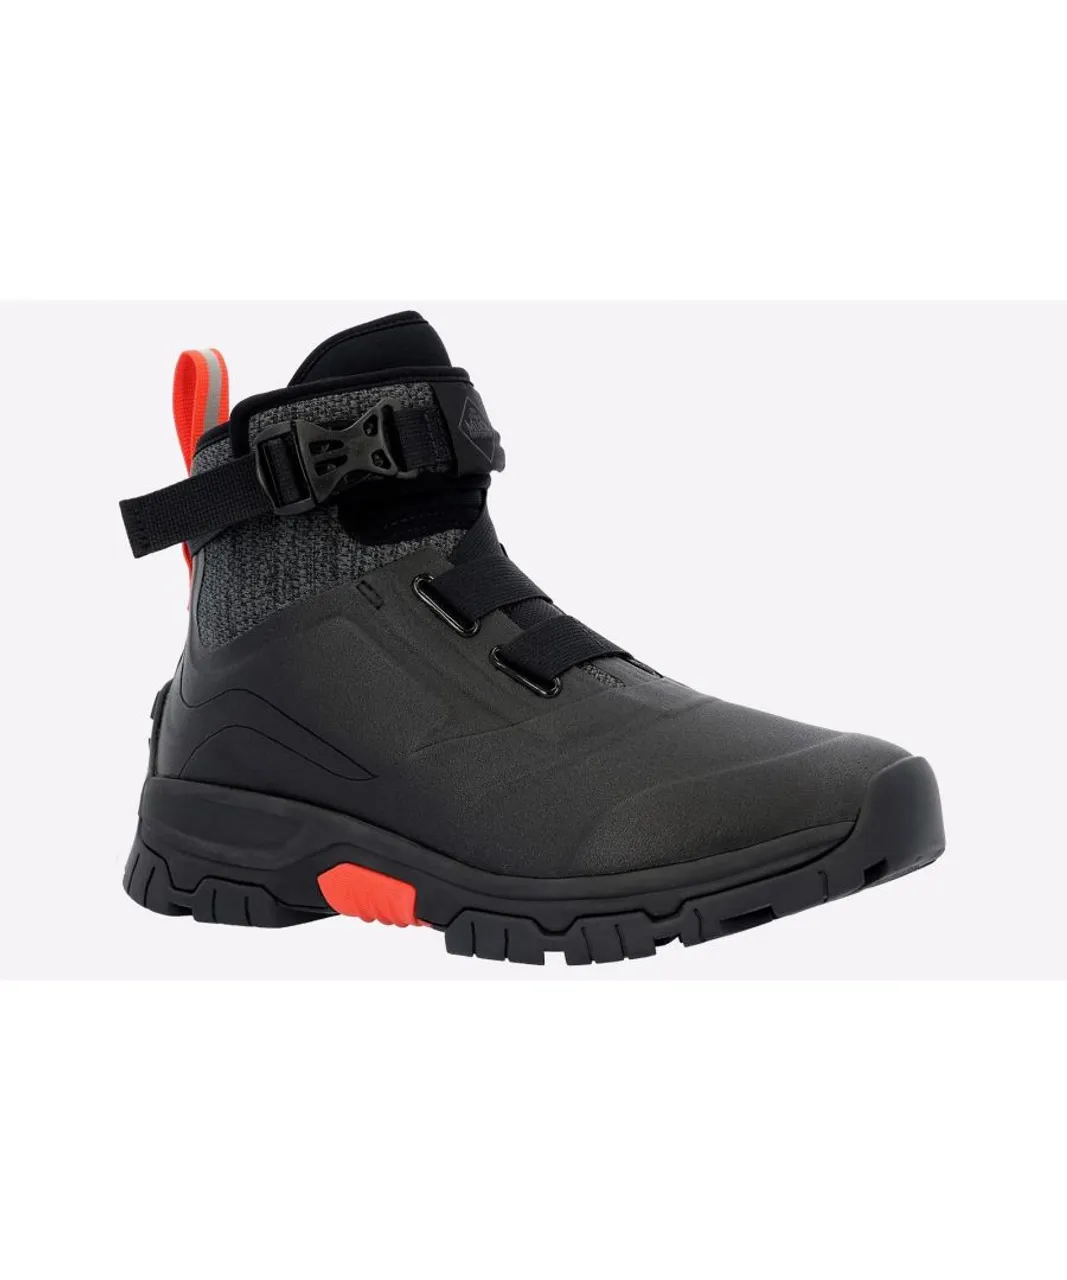 MUCK BOOTS Apex Pac Mid Waterproof Mens - Black Rubber